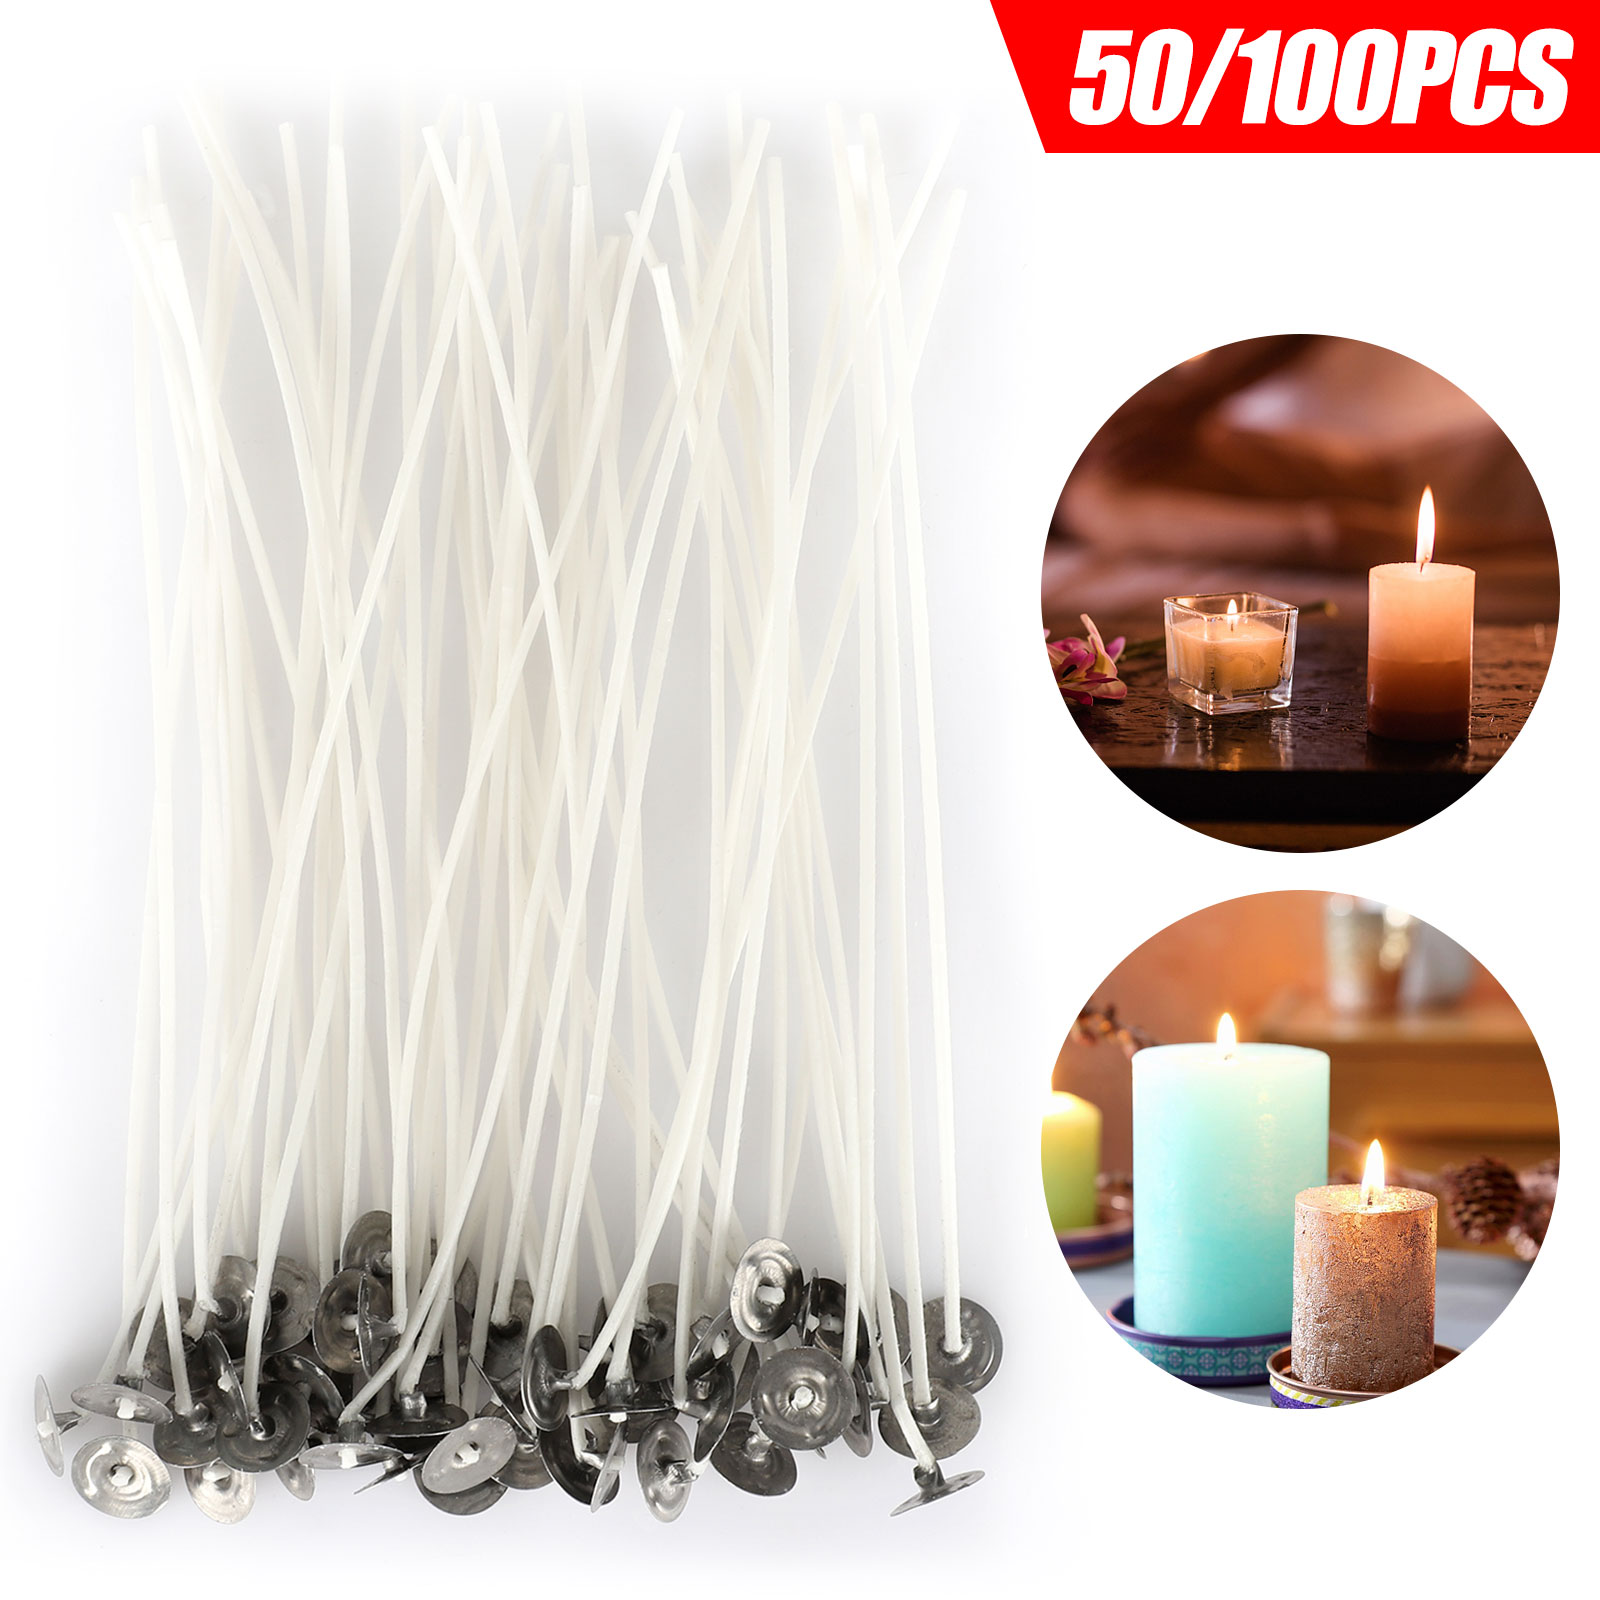 Best Pick Candle Wicks, 100 Pieces DIY Set of Candle Wicks for Candle Making